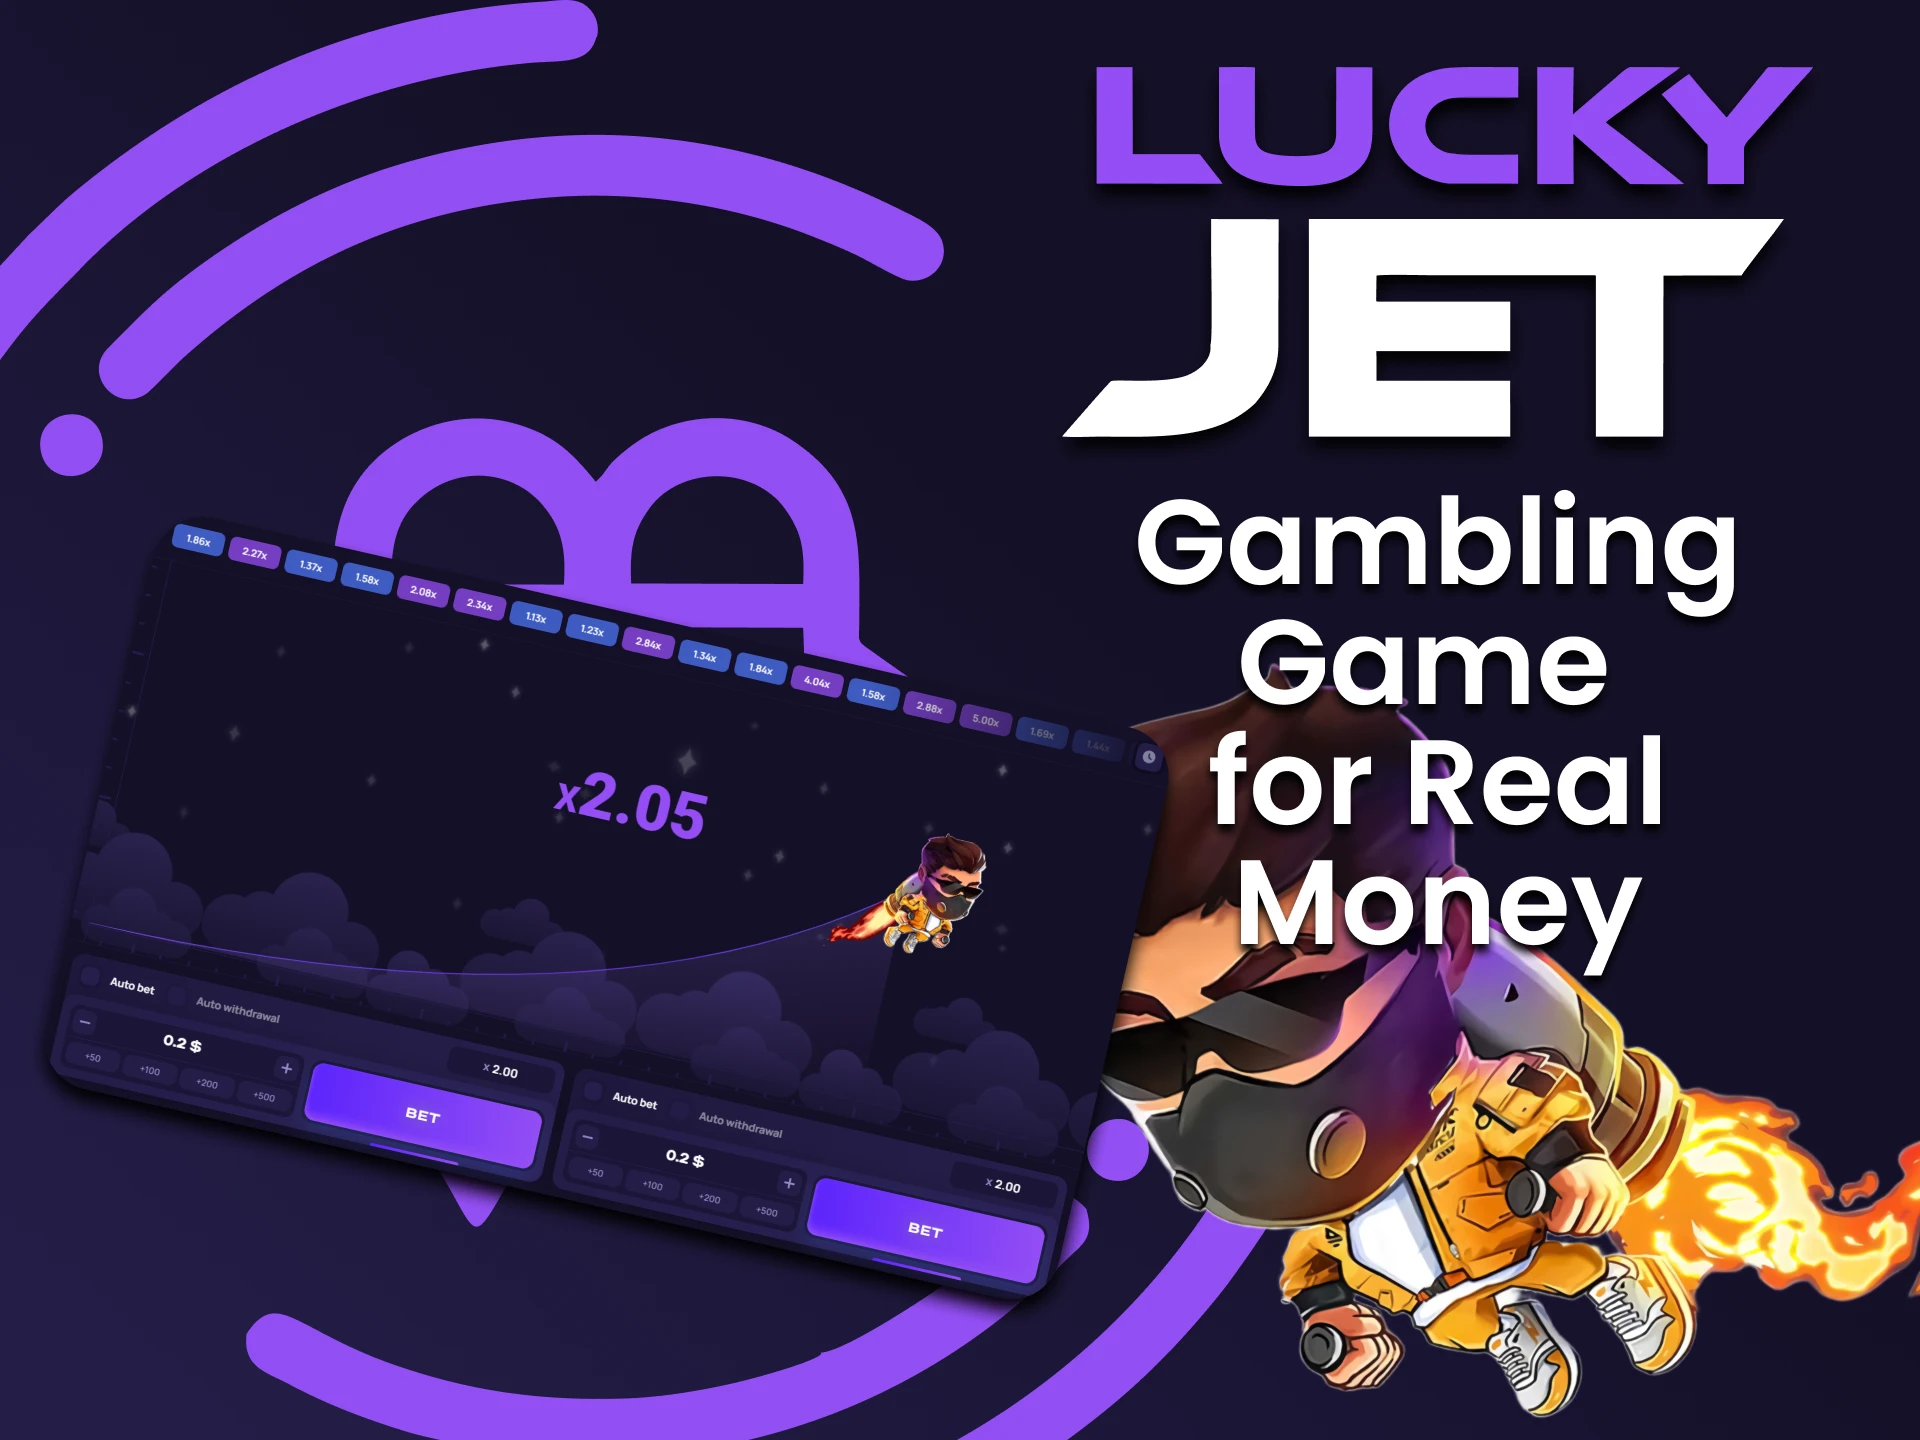 You can play for real money in Lycky Jet.